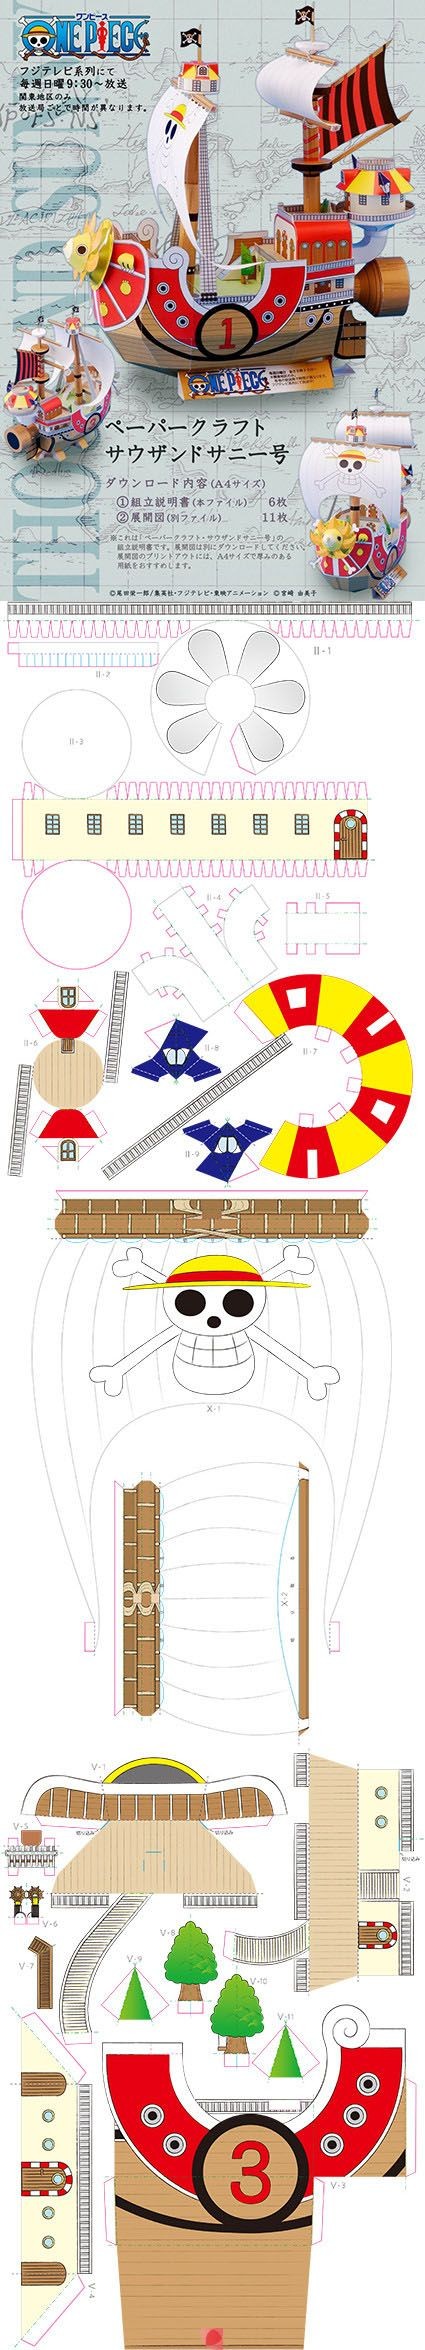 Thousand Sunny Papercraft One Piece My son Doesn T Watch the Show but He Loves Pirates and